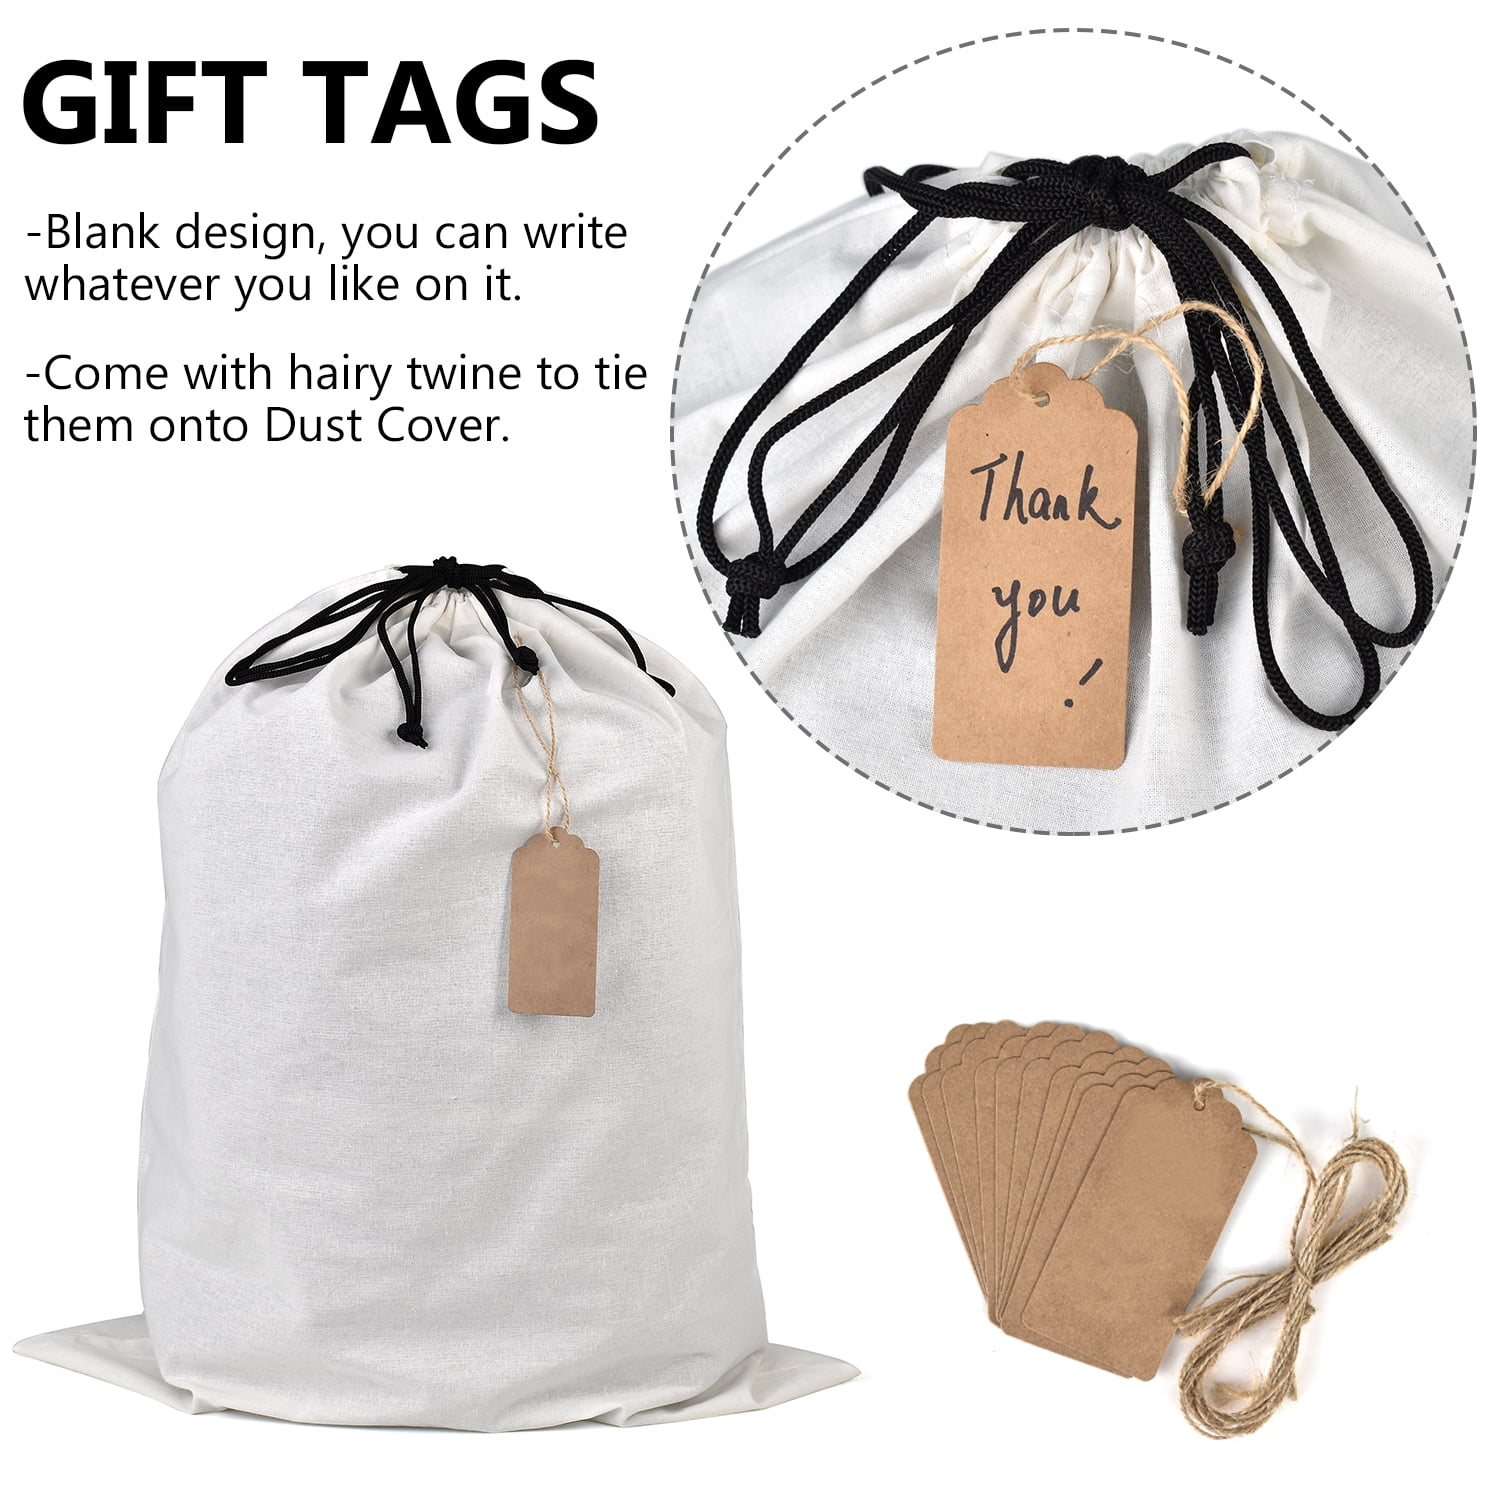 Tote and Shopper Bags by Ecosource - Issuu